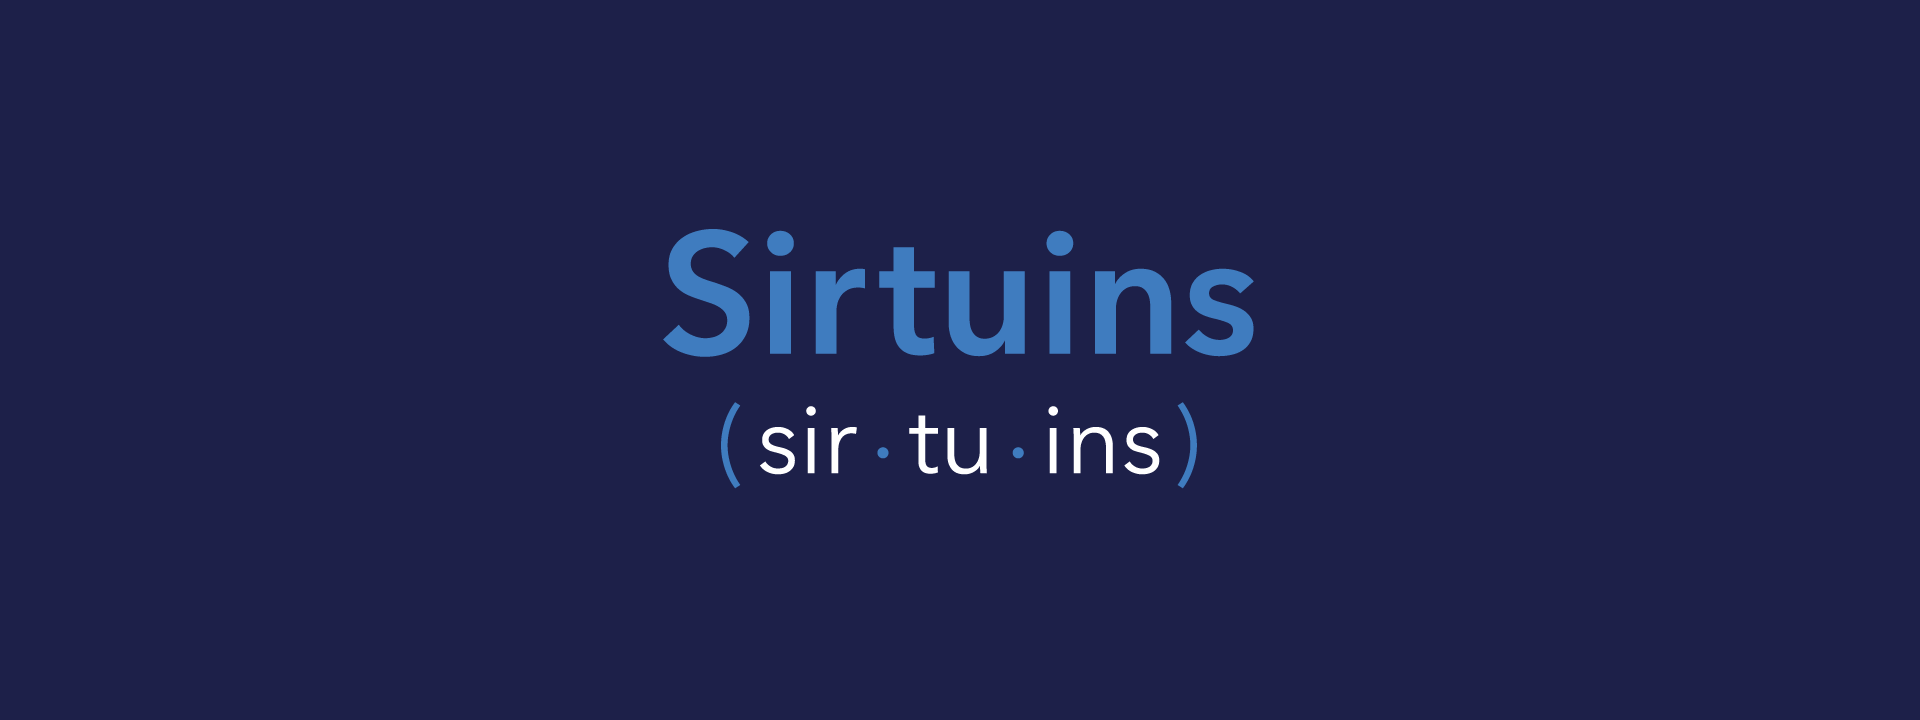 What's All the Fuss About Sirtuins?